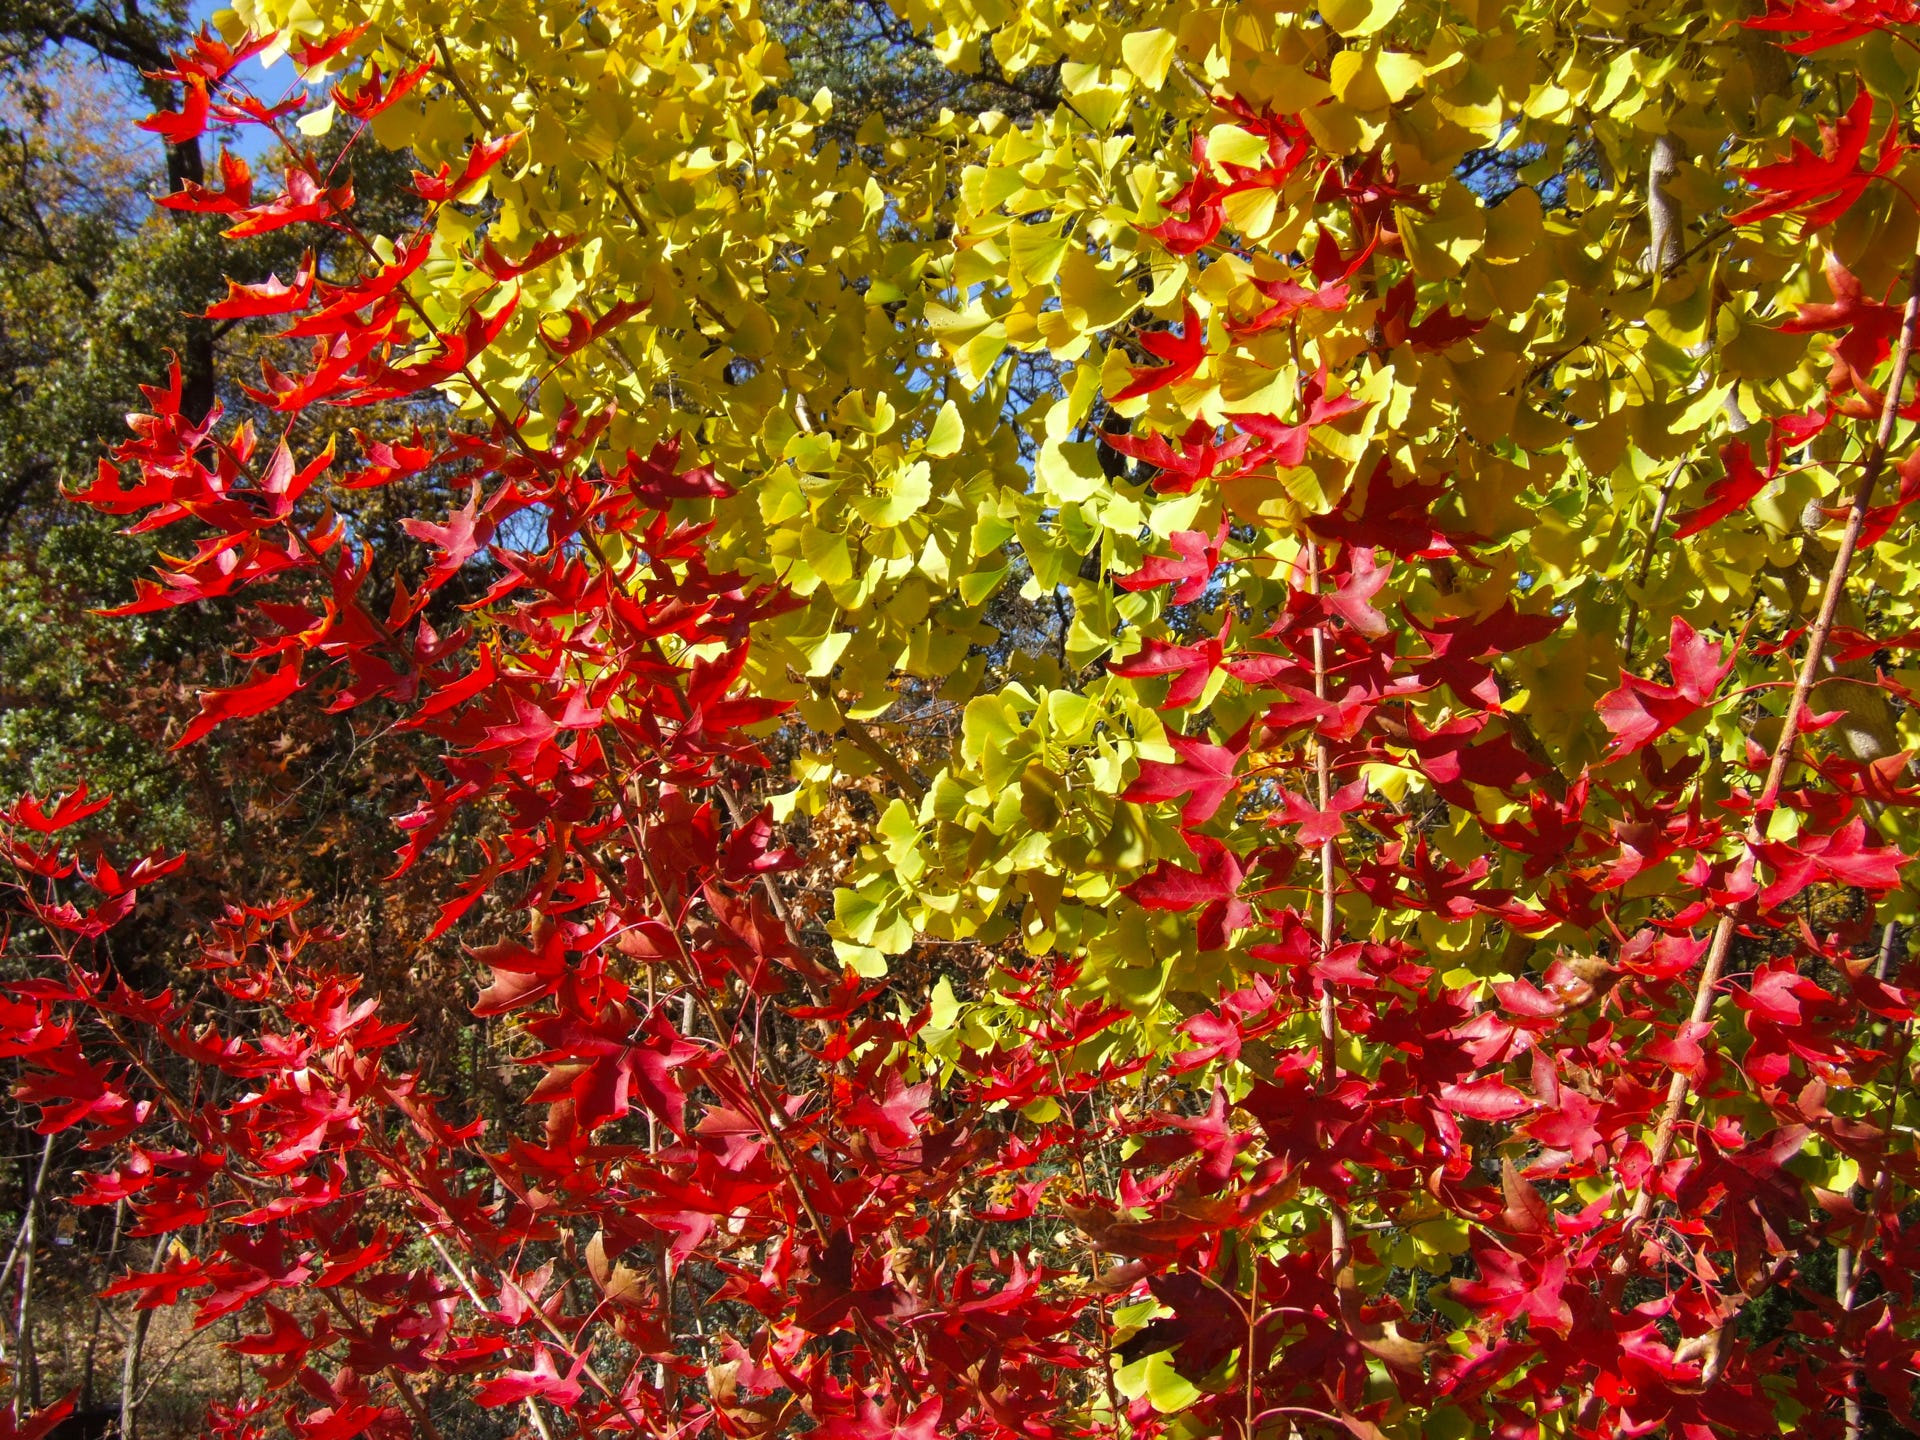 Fire Dragon TM Shantung maple in year 2007 with Ginkgo.  Acer truncatum Fire Dragon TM developed at Metro Maples, Fort Worth, TX, a great Shandong red maple.